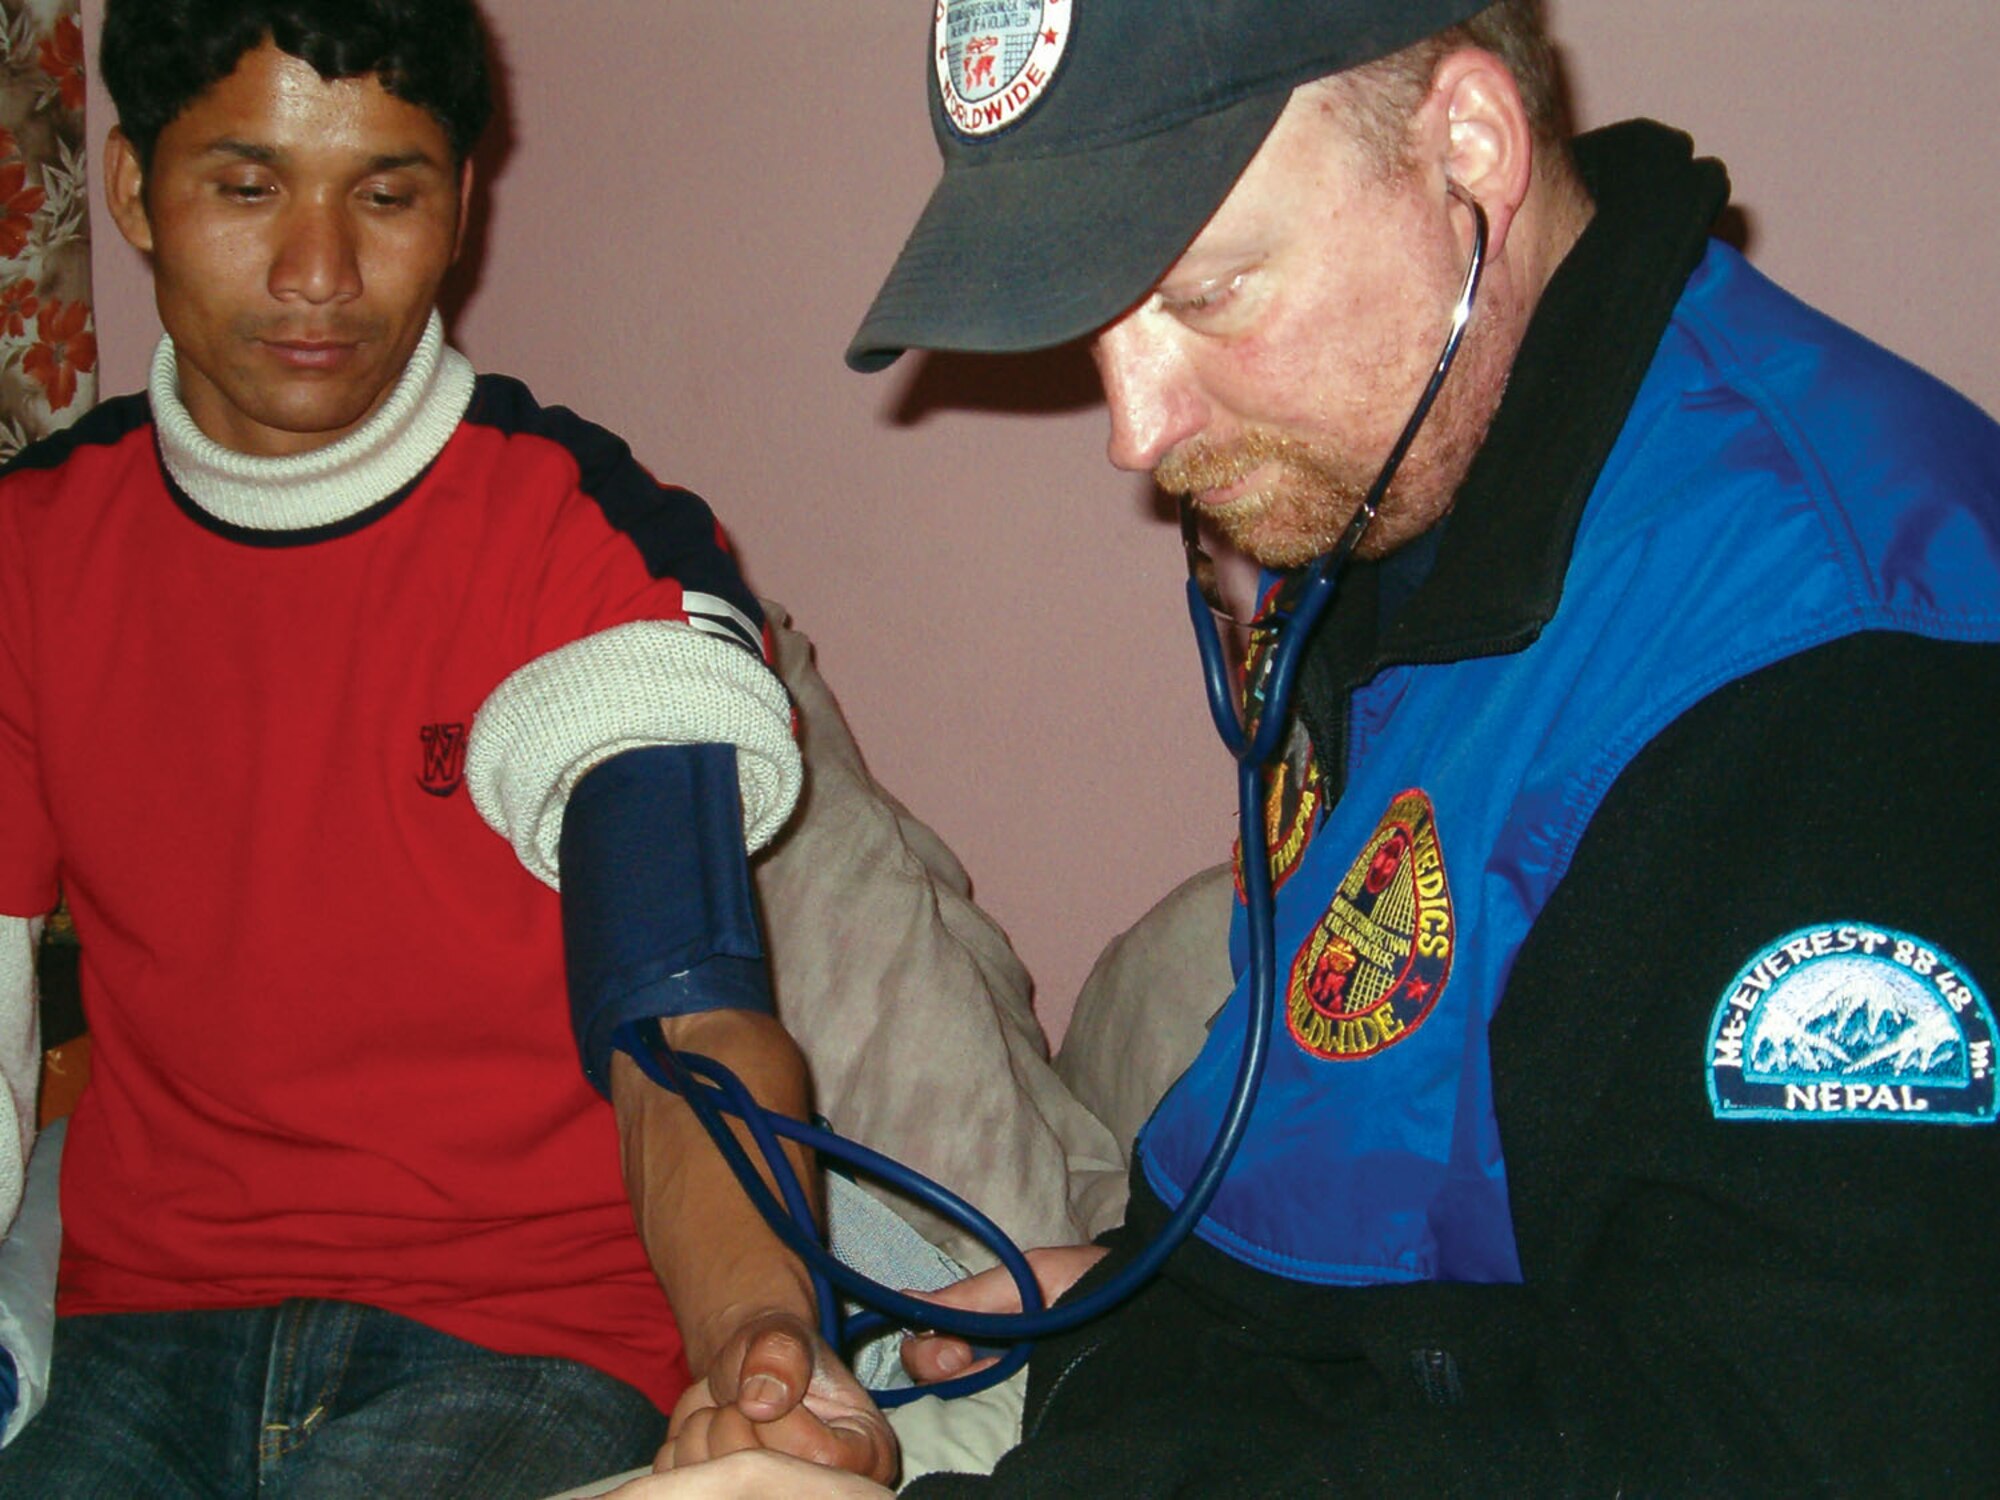 Chris Hamel gives a check up to Mani, director of the orphan children's home in Katmandu, Nepal in March 2008.  When not providing free medical care to citizens of other countries as a member of Volunteer Medics, he is Tech. Sgt. Chris Hamel, a Reservist with 446th Aeromedical Staging Squadron. (Courtesy photo/Gerald Flint)